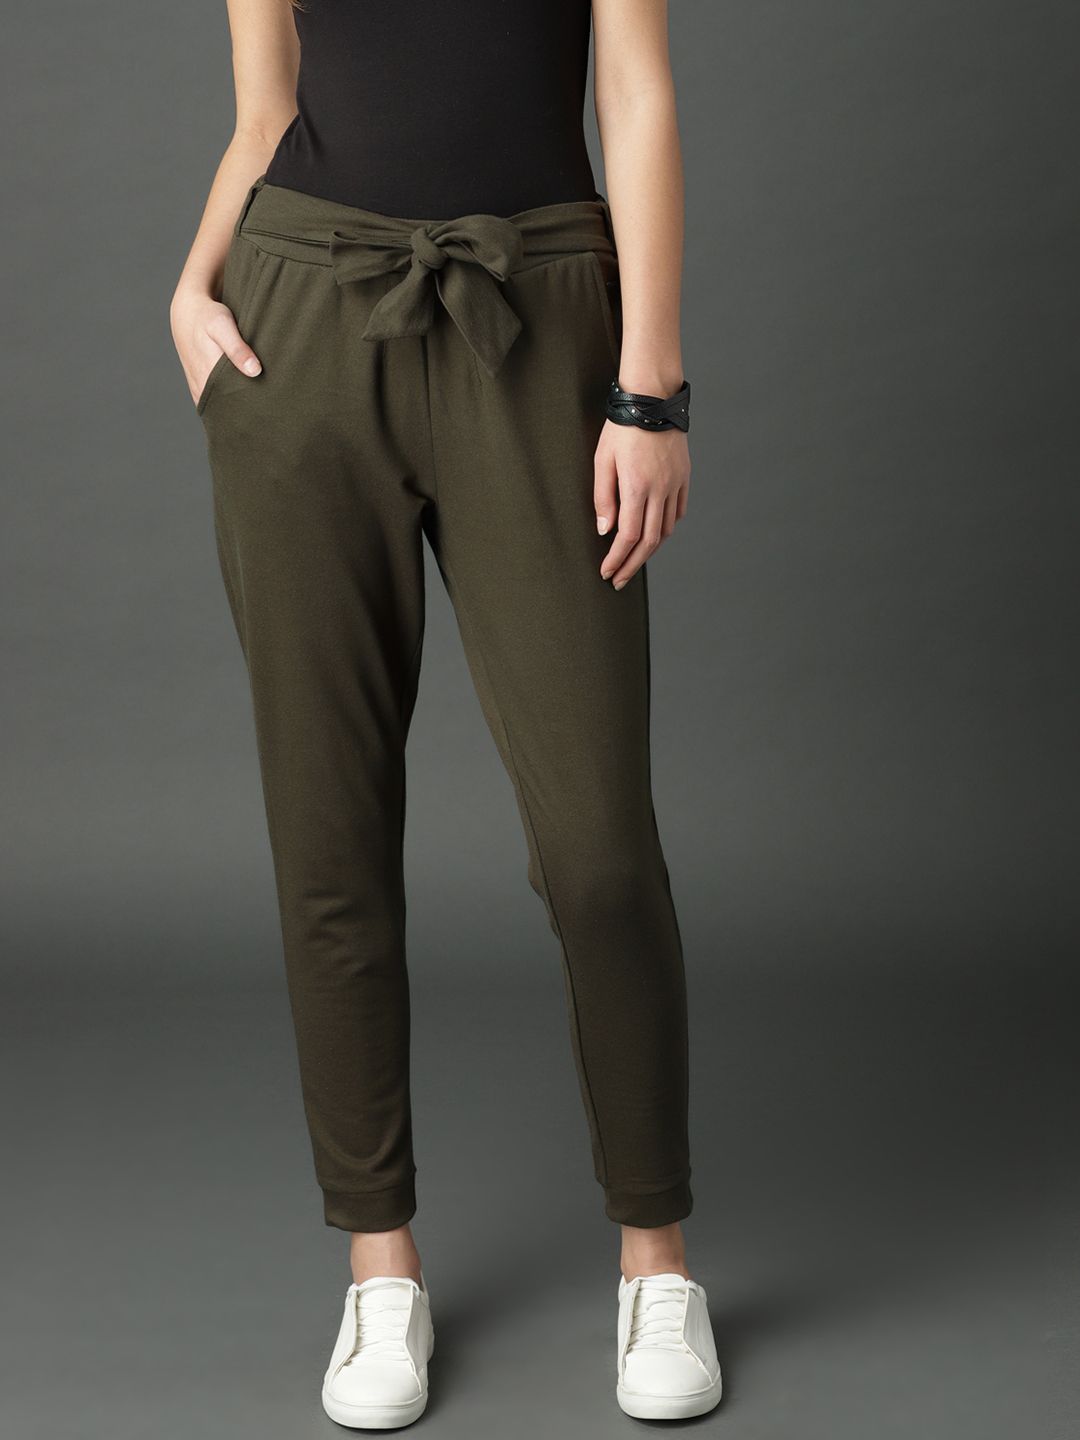 Roadster Women Olive Green Regular Fit Solid Joggers Price in India